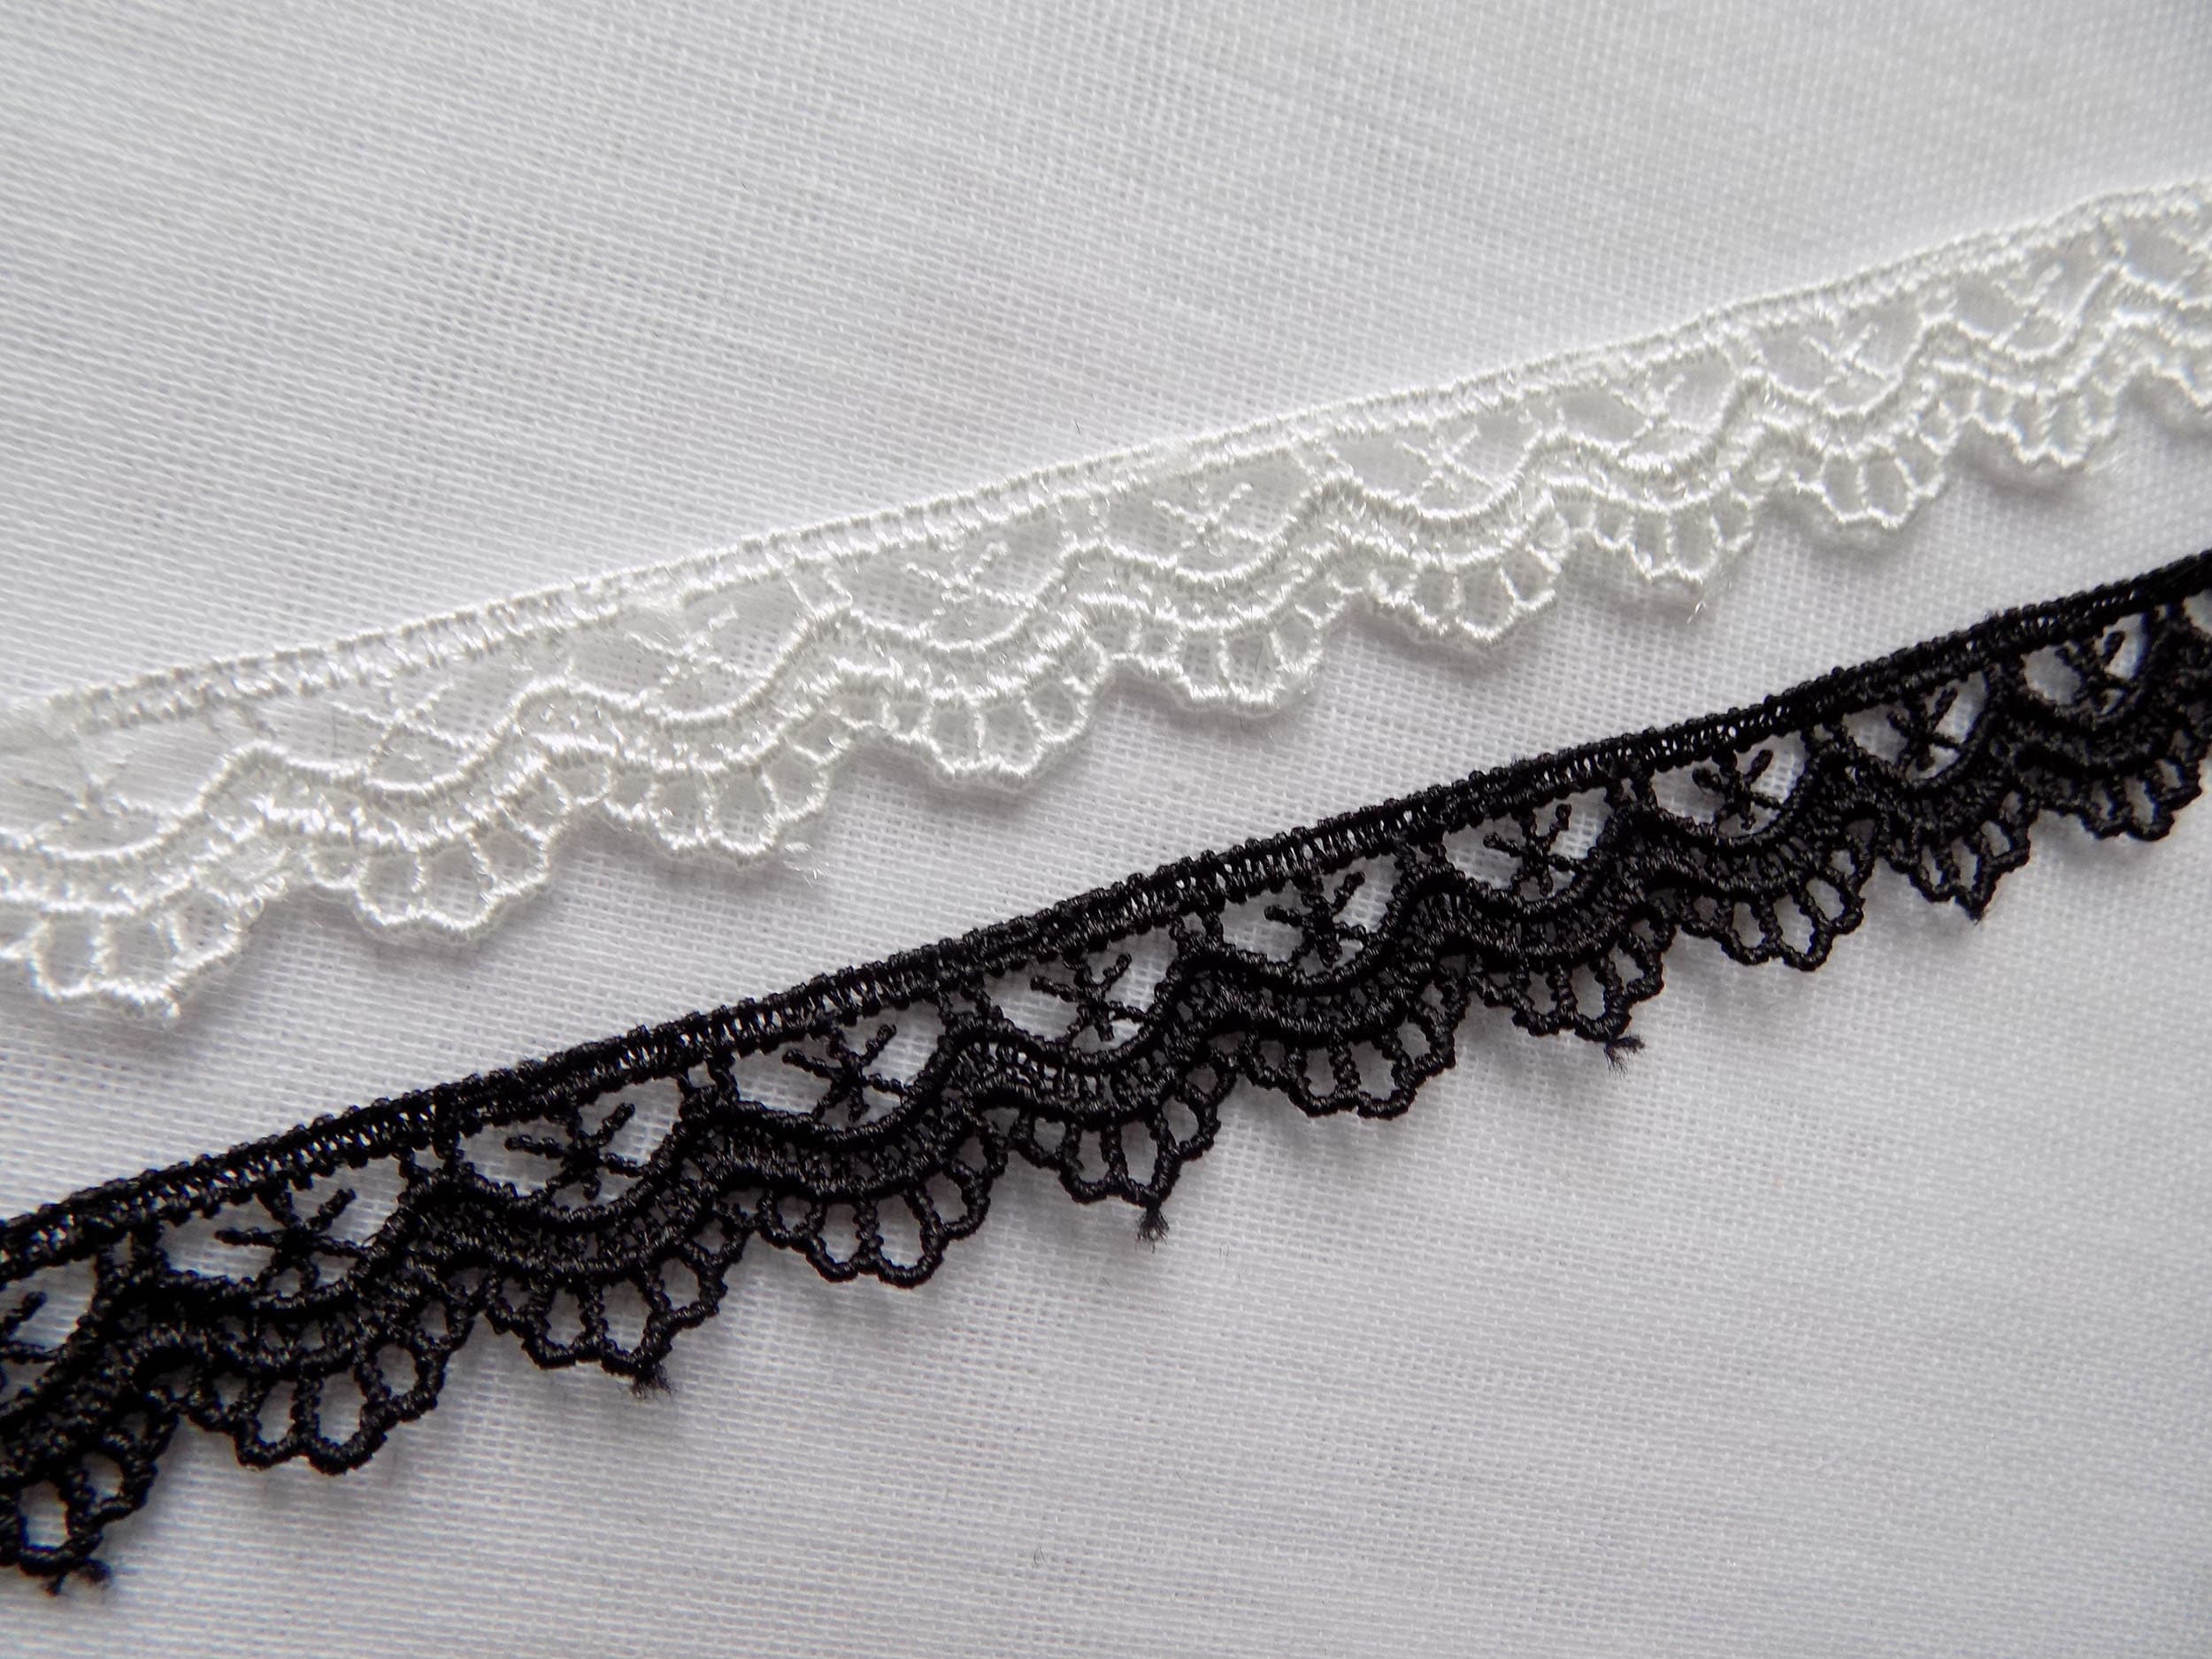 2 yards hand-embroidered lace trim wedding dress accessories 80MM 